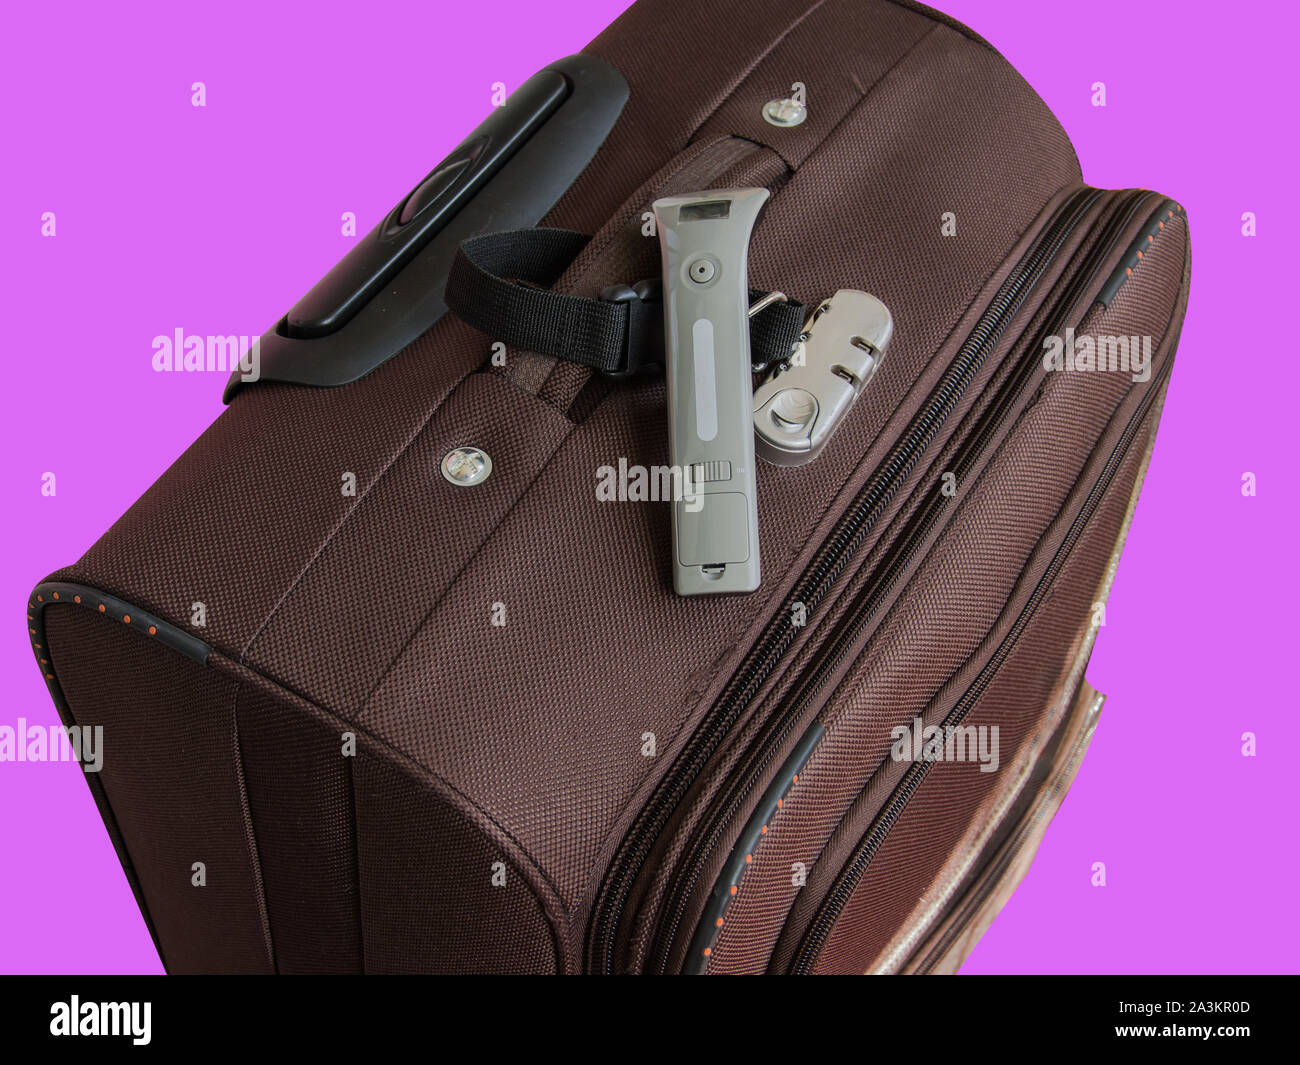 https://c8.alamy.com/comp/2A3KR0D/digital-luggage-scales-and-suitcase-concept-of-avoid-baggage-overweight-in-airport-2A3KR0D.jpg